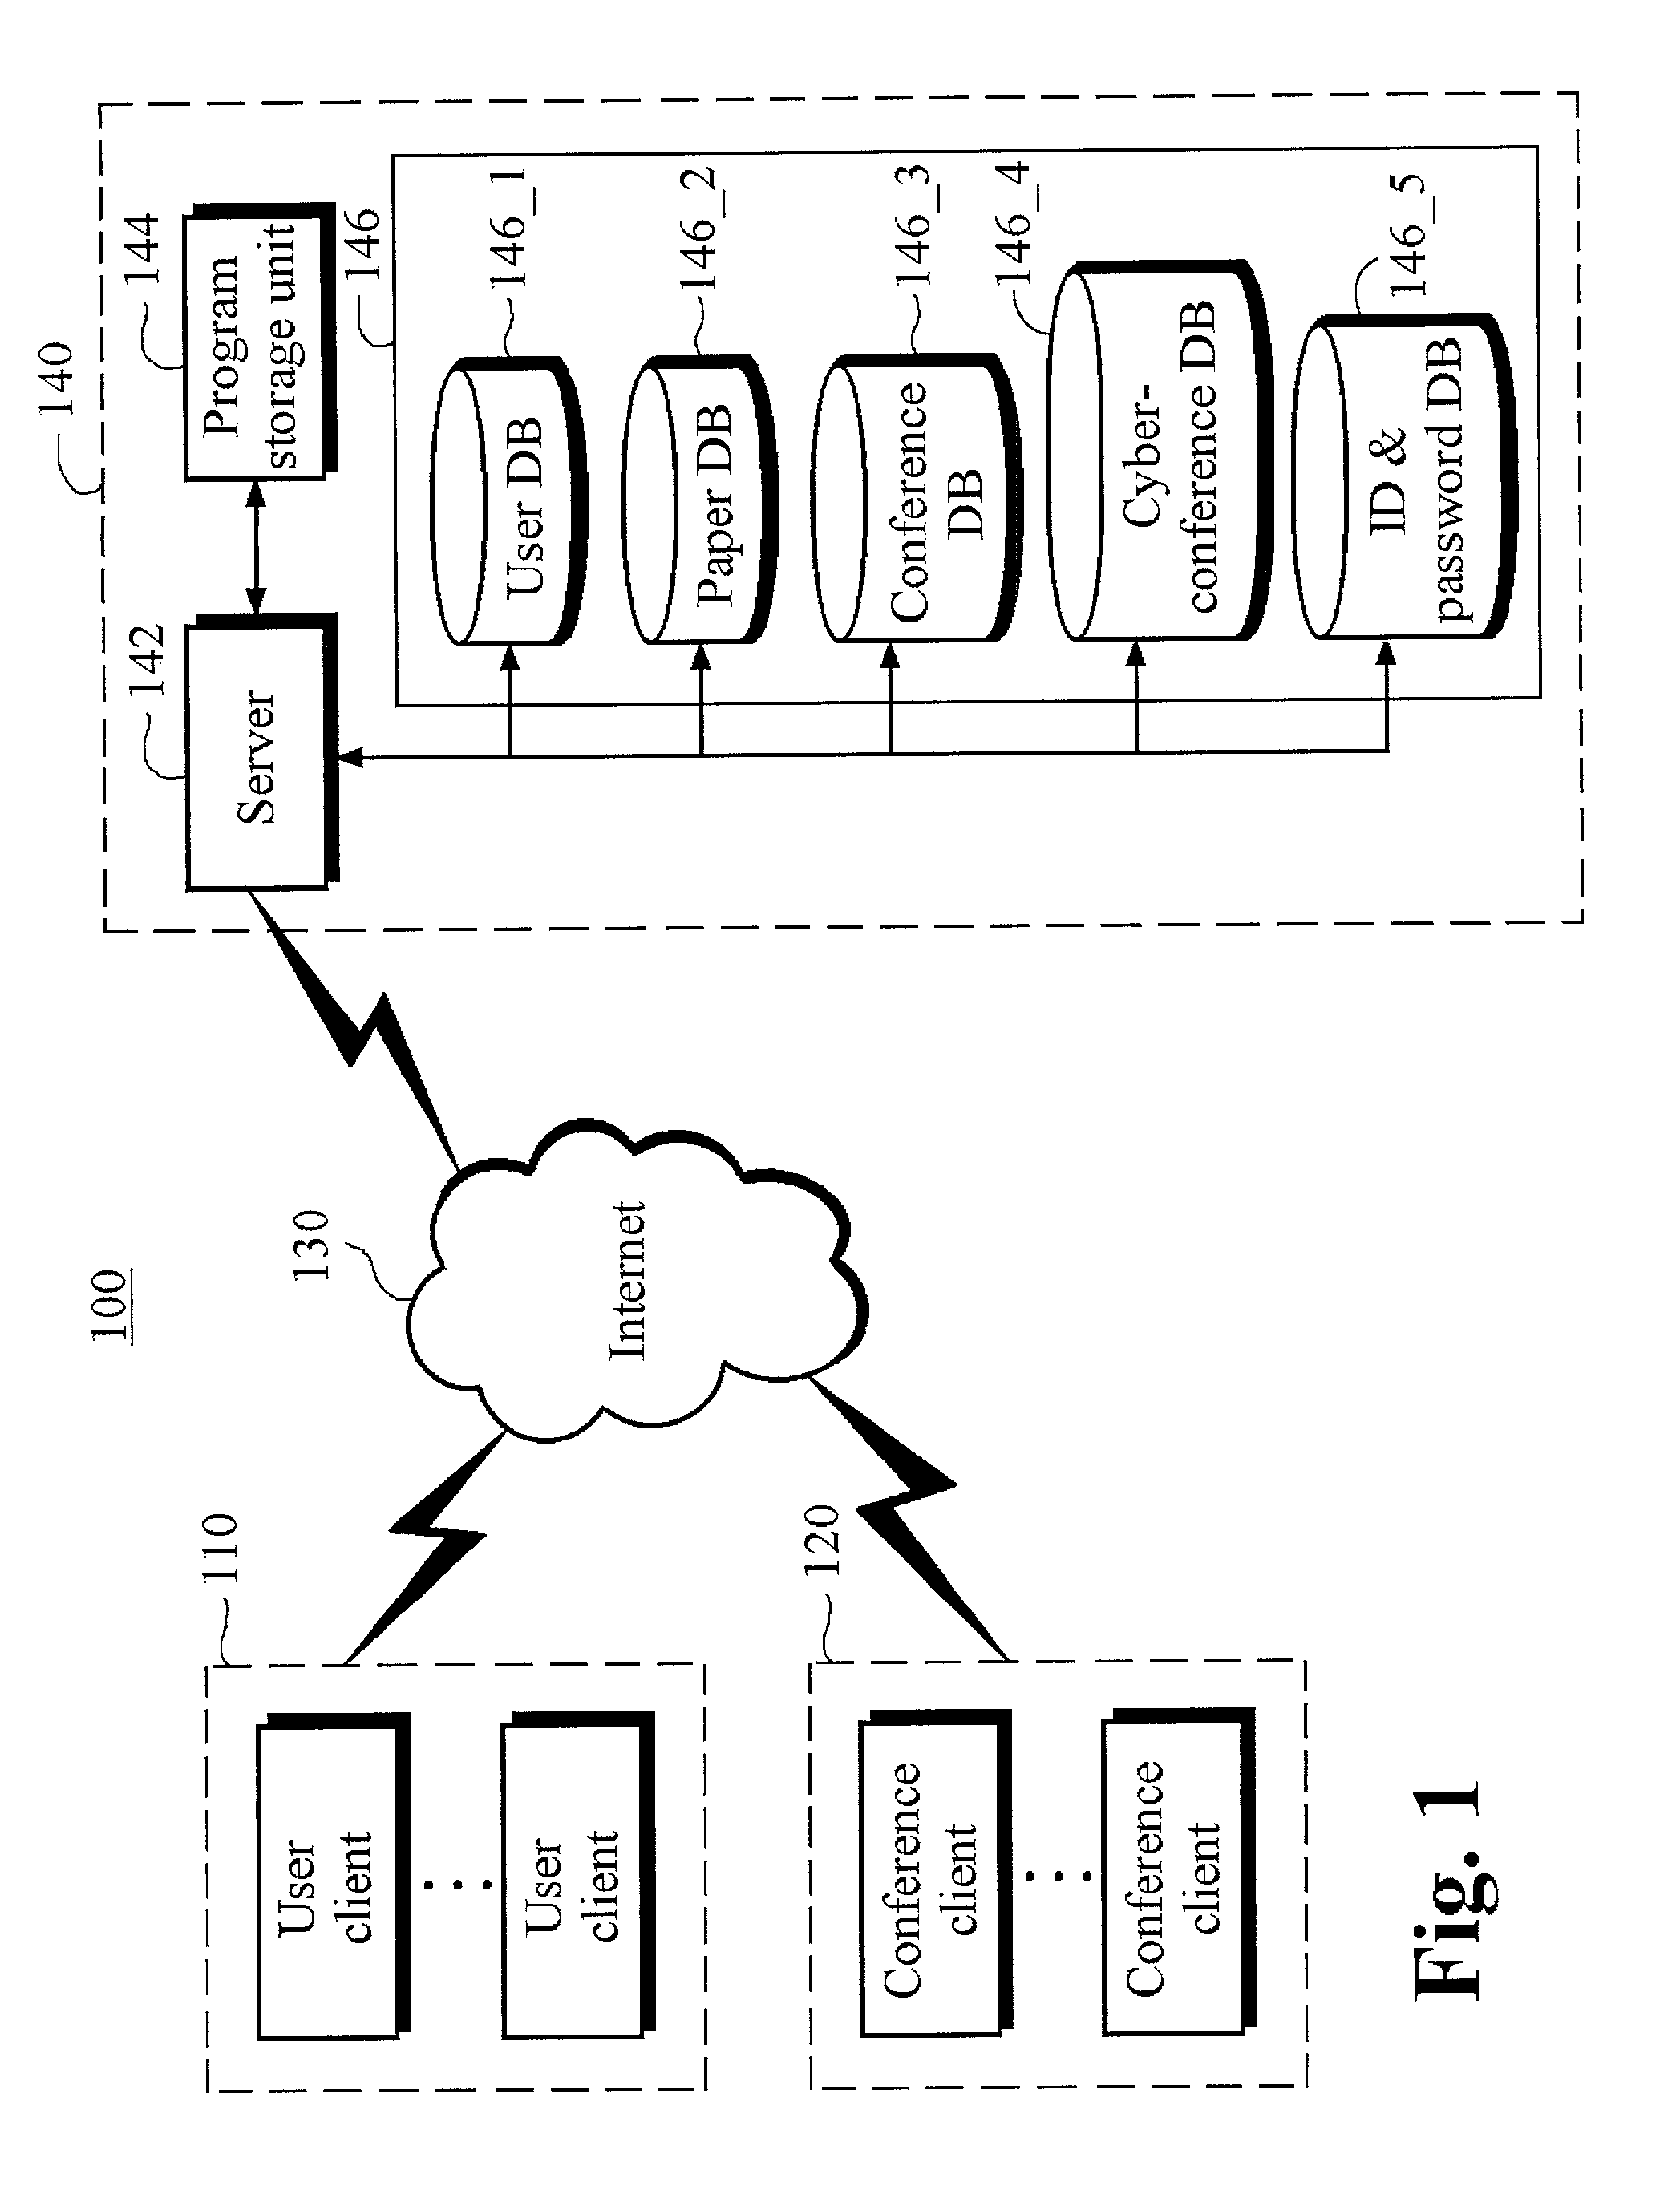 Method for creating and operating cyber-conference including paper presentations and system for the same